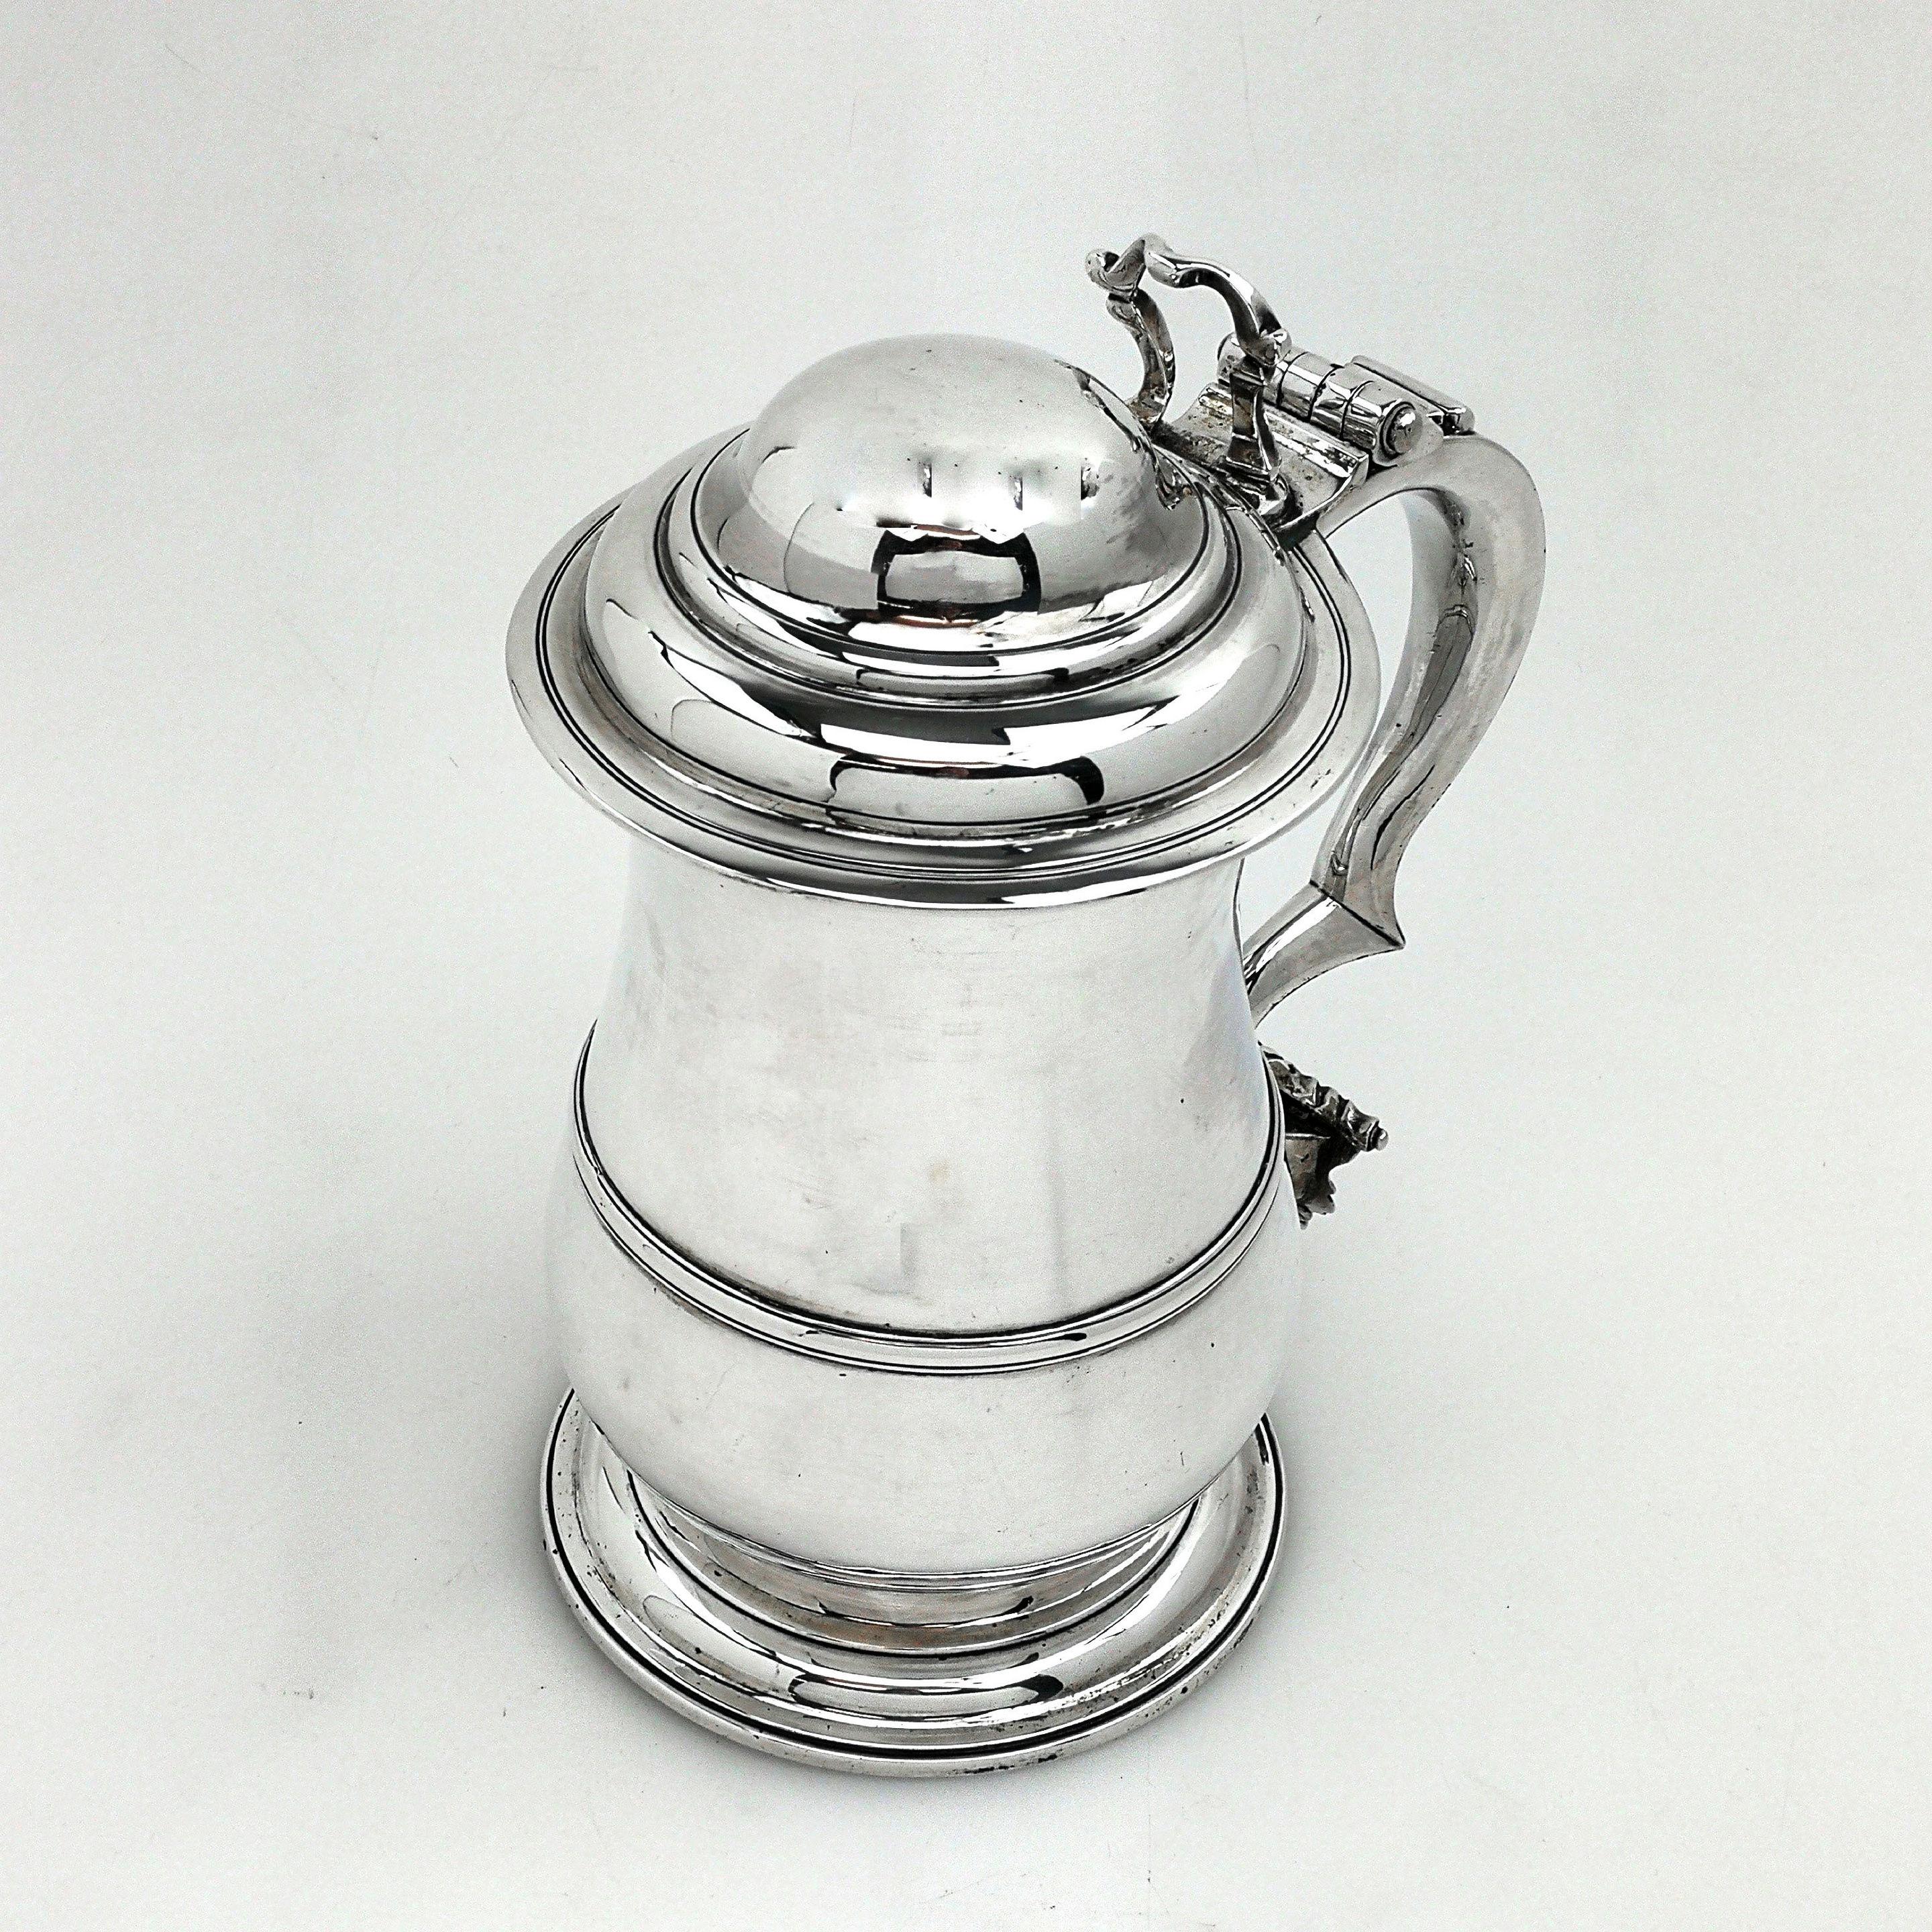 A classic antique George II solid silver lidded tankard. This silver Georgian Quart tankard has an impressive domed hinged lid with a shaped thumb piece and a substantial scroll handle. The Tankard has a traditional baluster shape with an applied